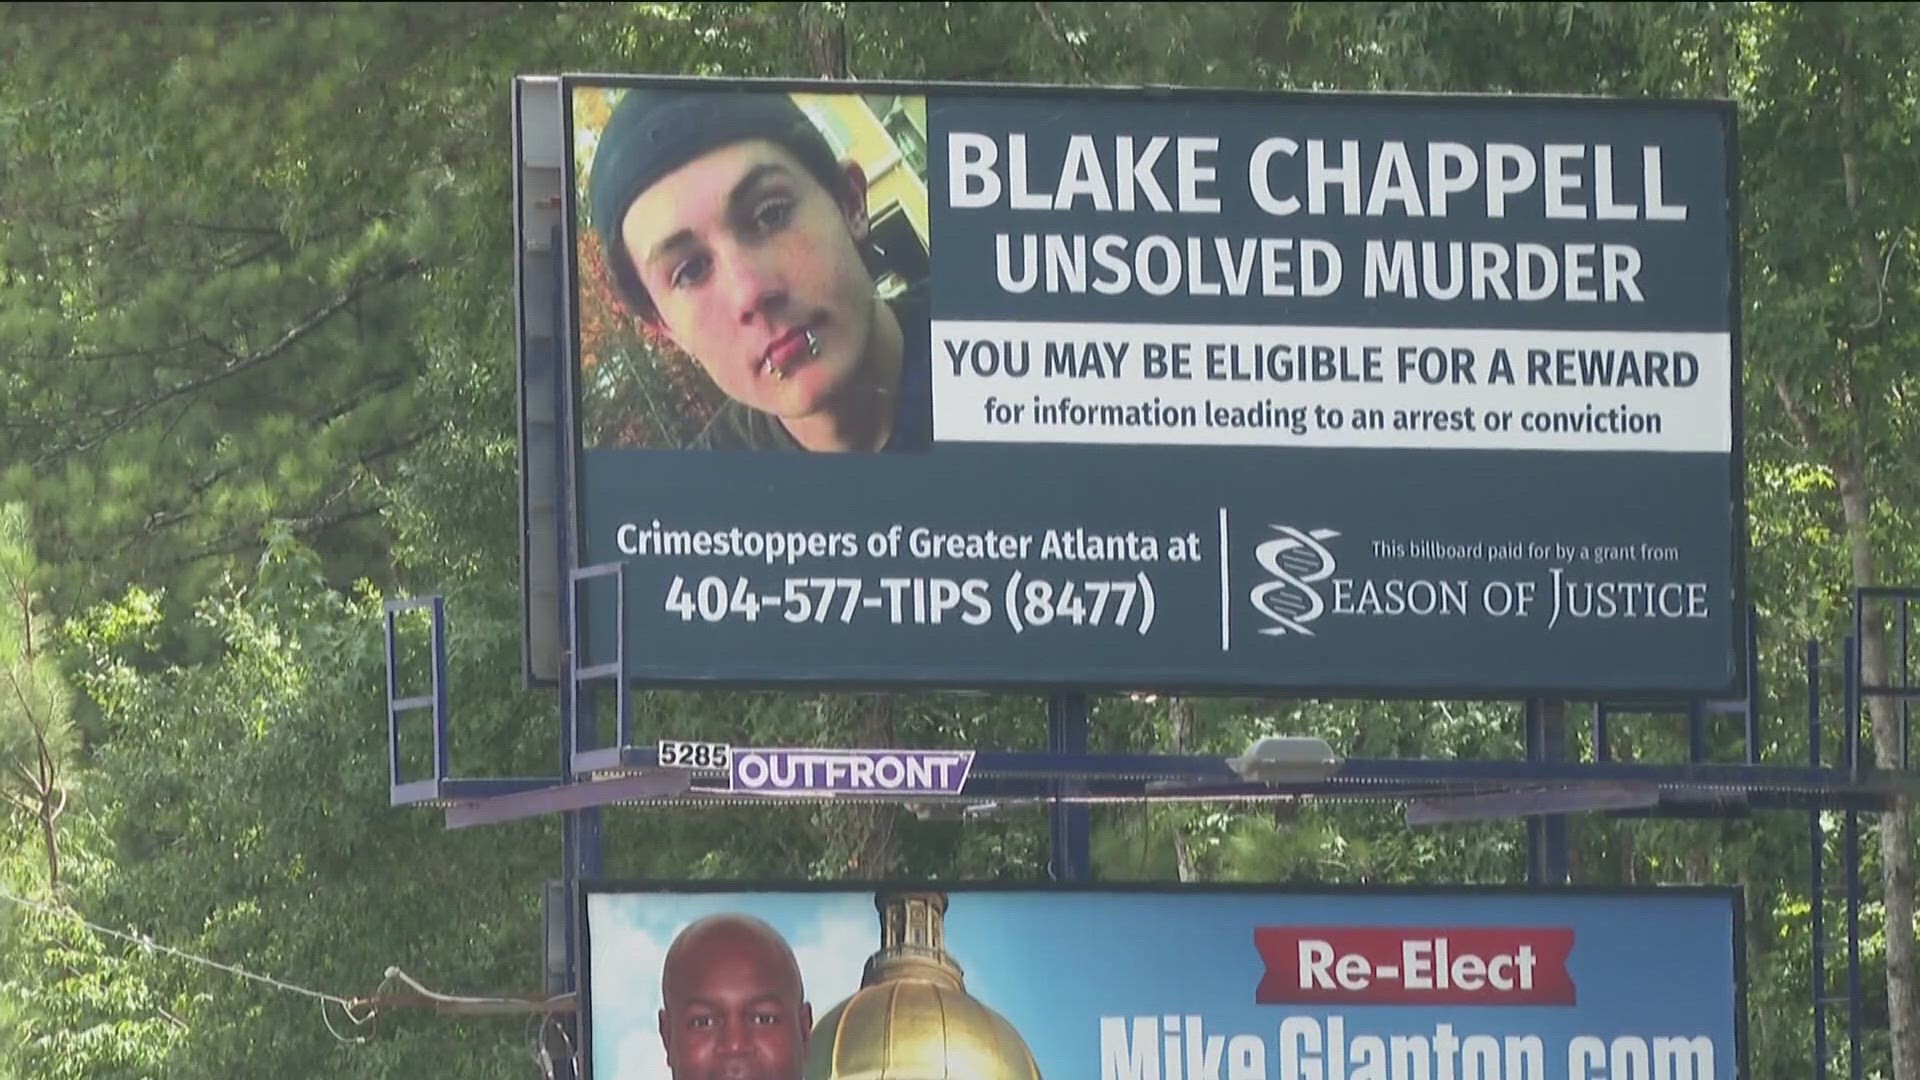 Blake Chappell's killer still hasn't been caught, 12 years after his body was discovered.